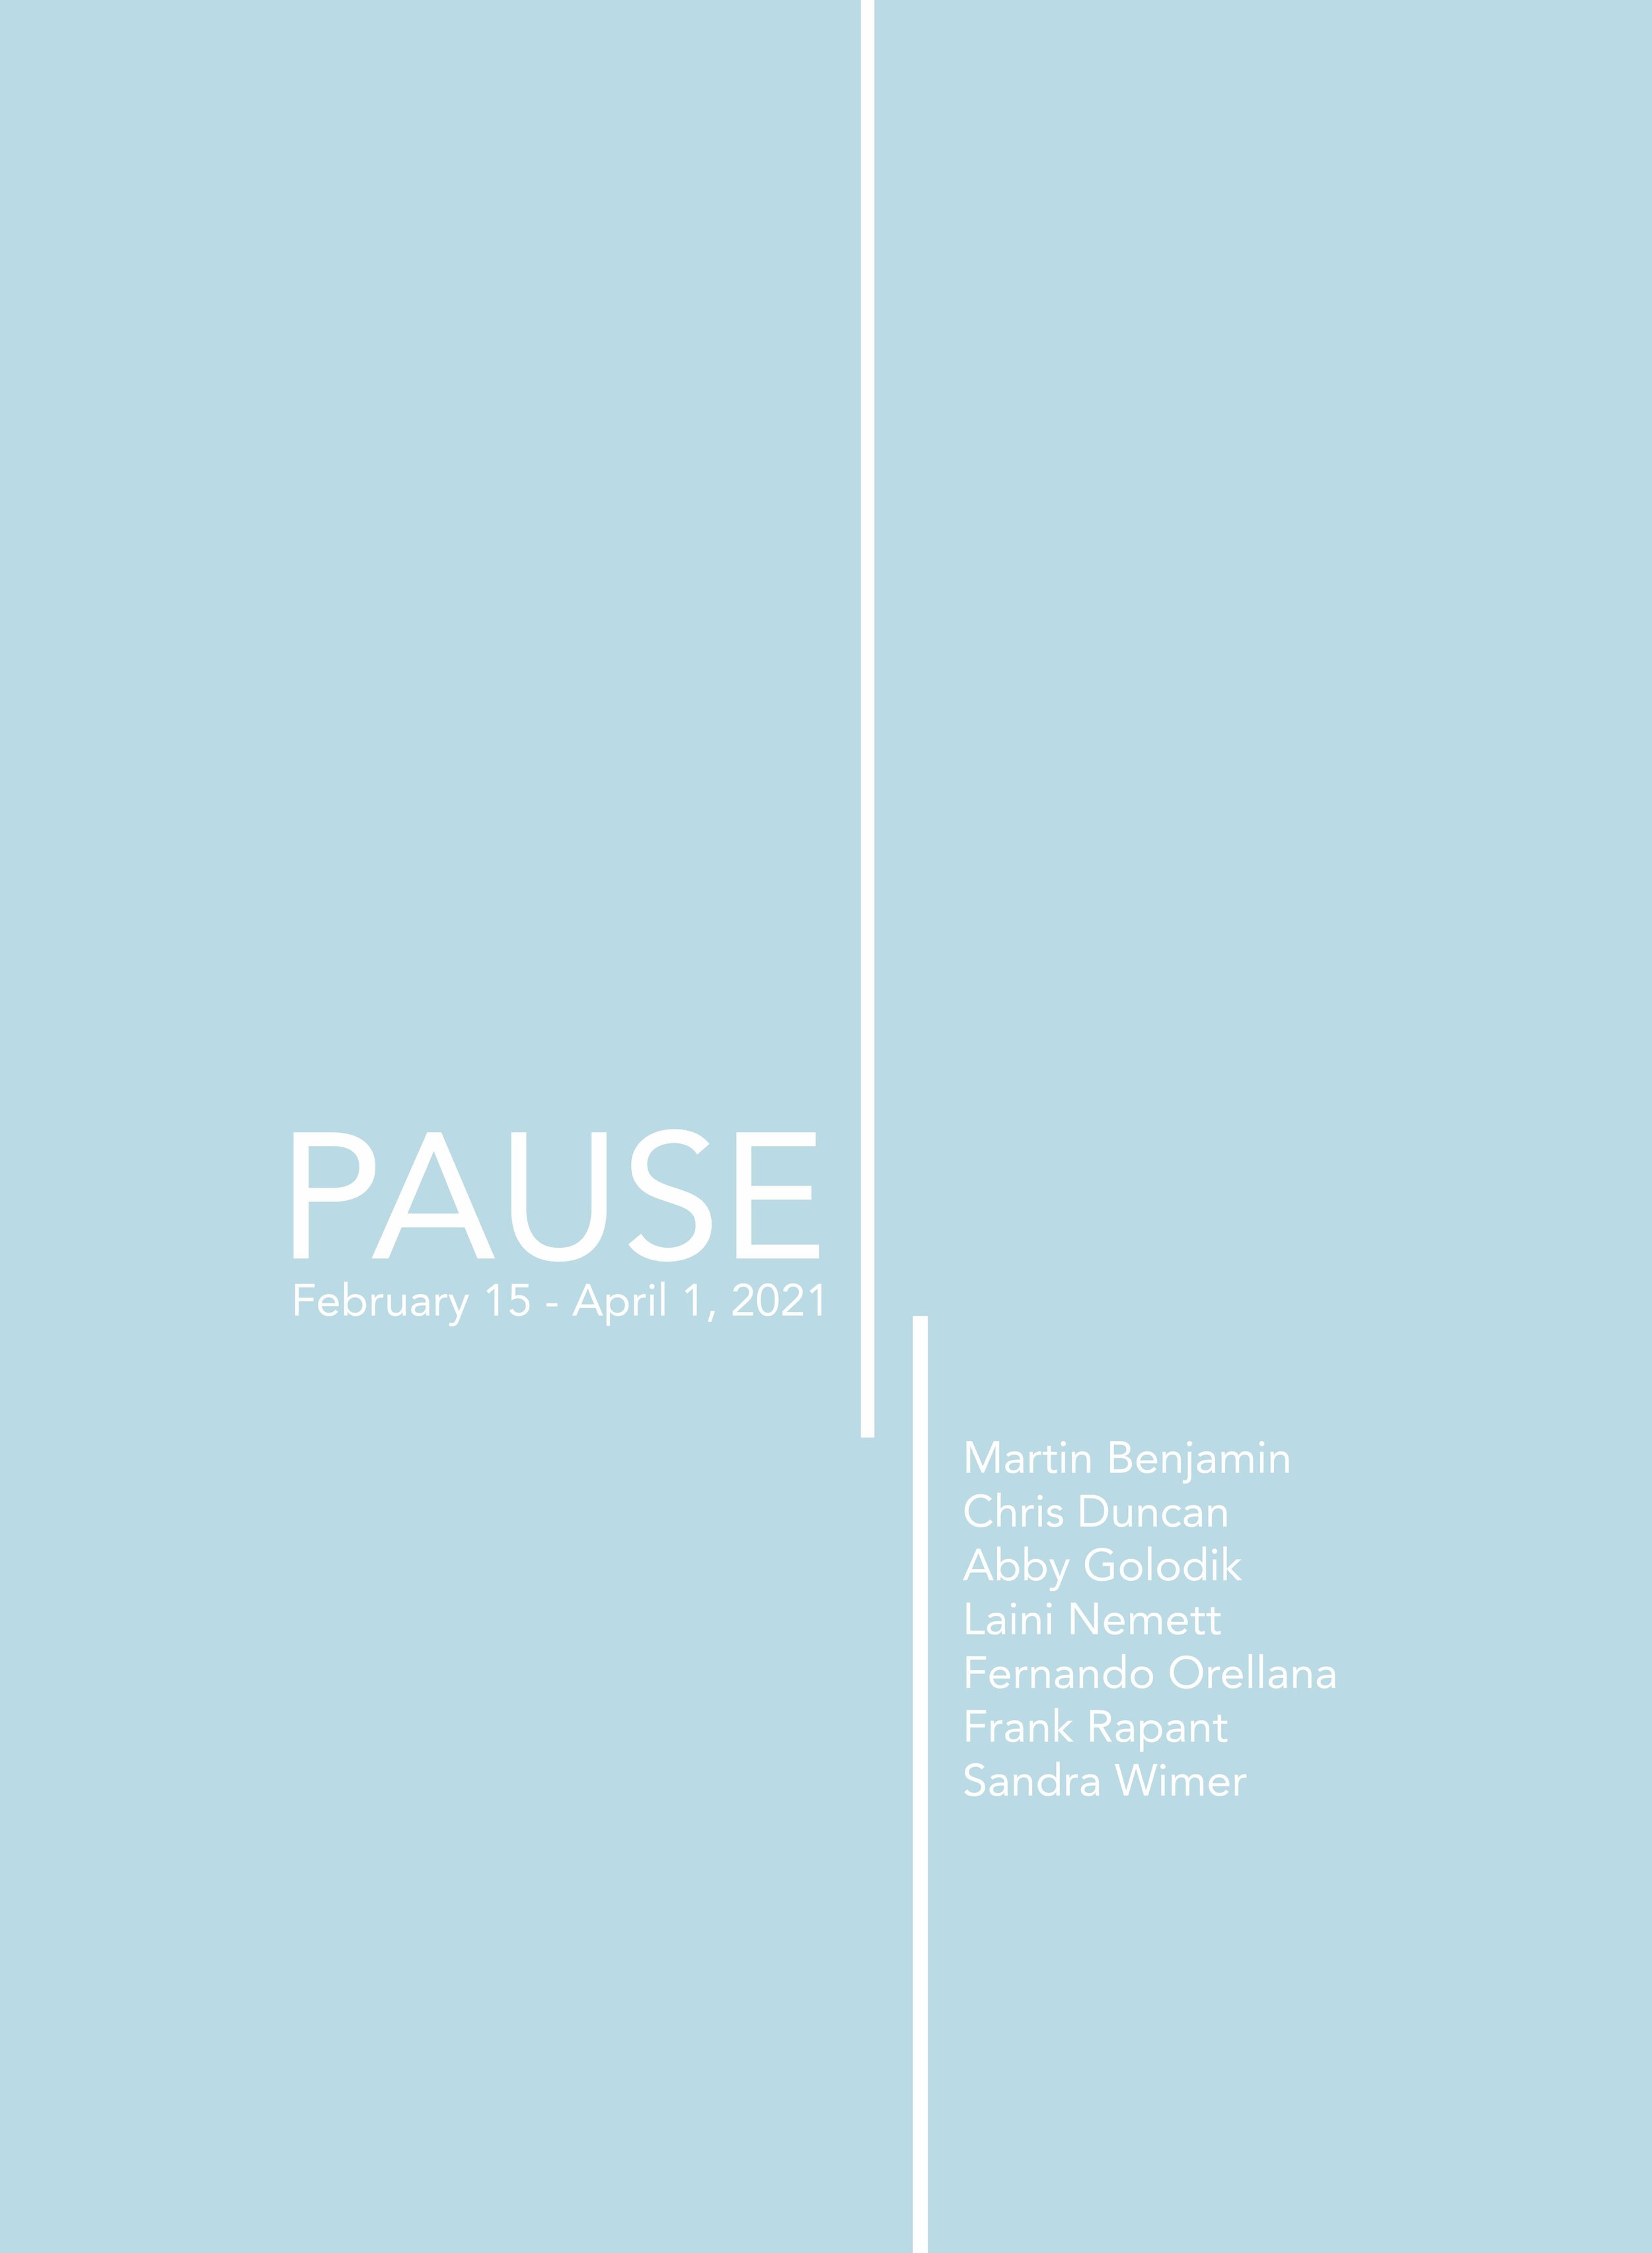 Pause Exhibition Poster.jpg